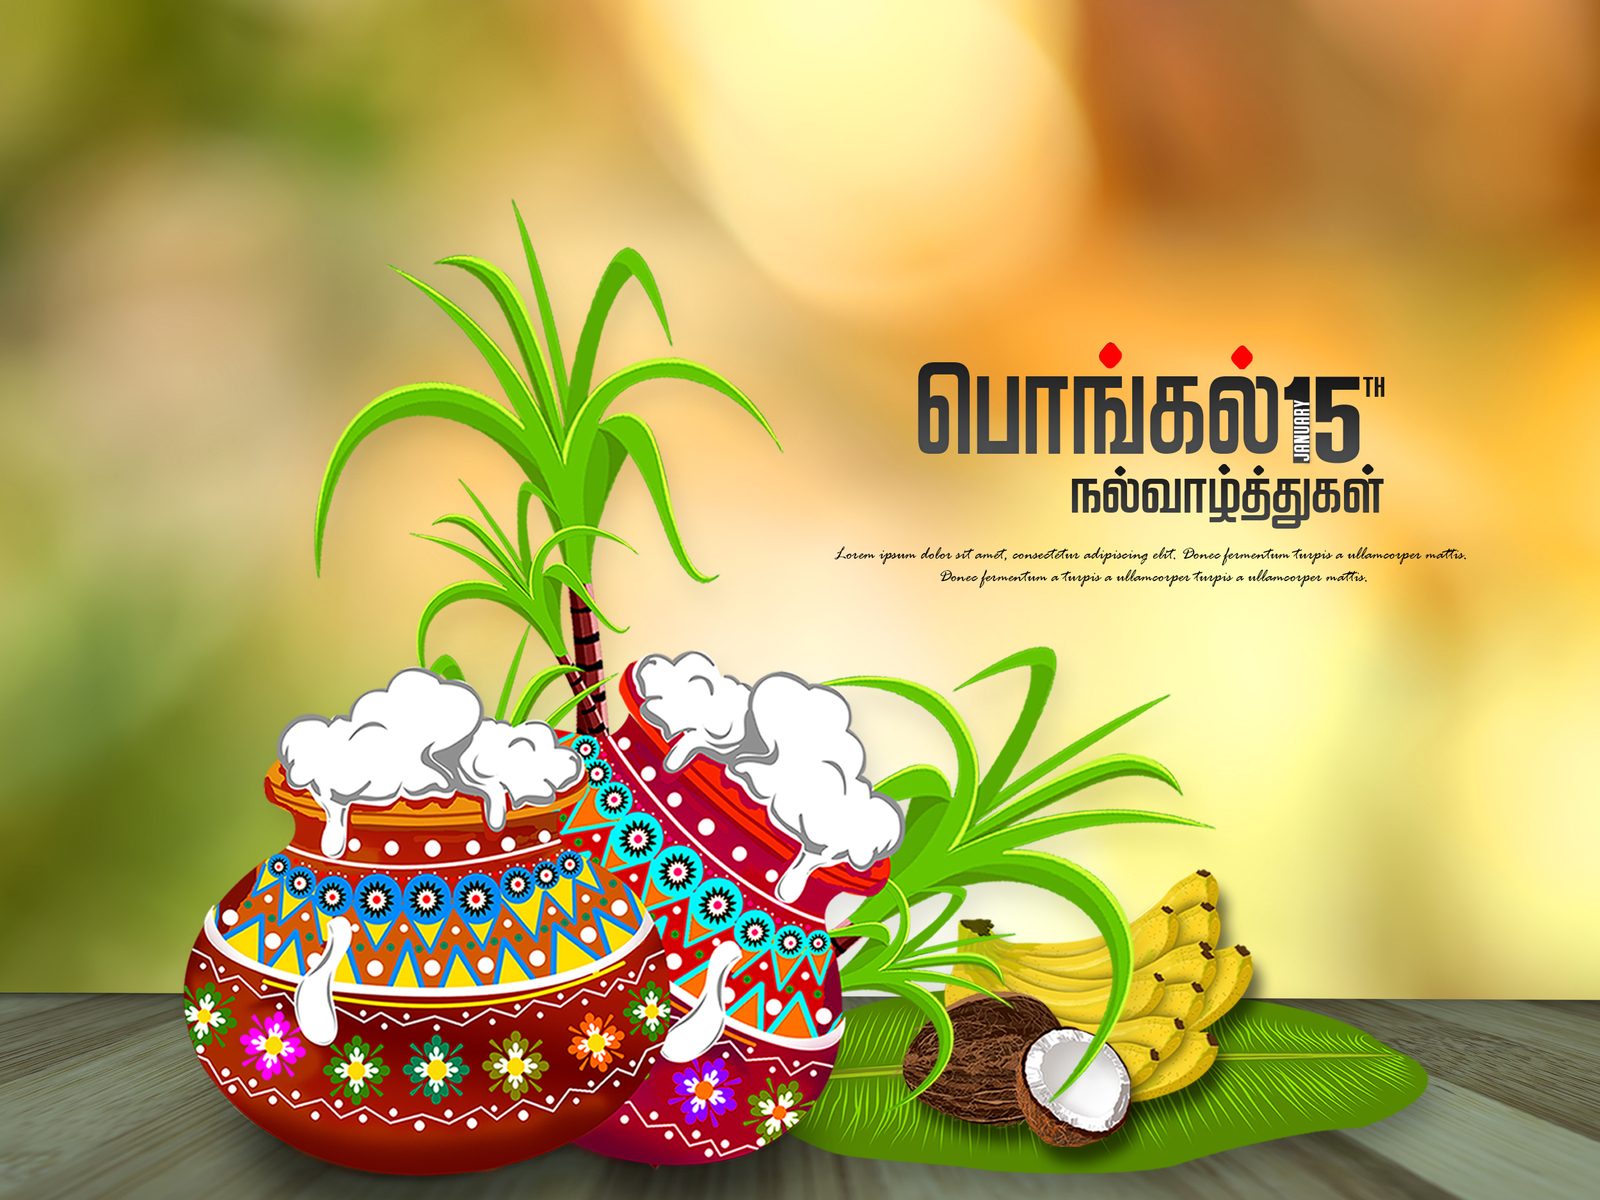 Happy Pongal 22 Wishes Images Status Quotes Messages And Whatsapp Greetings To Share In English And Tamil